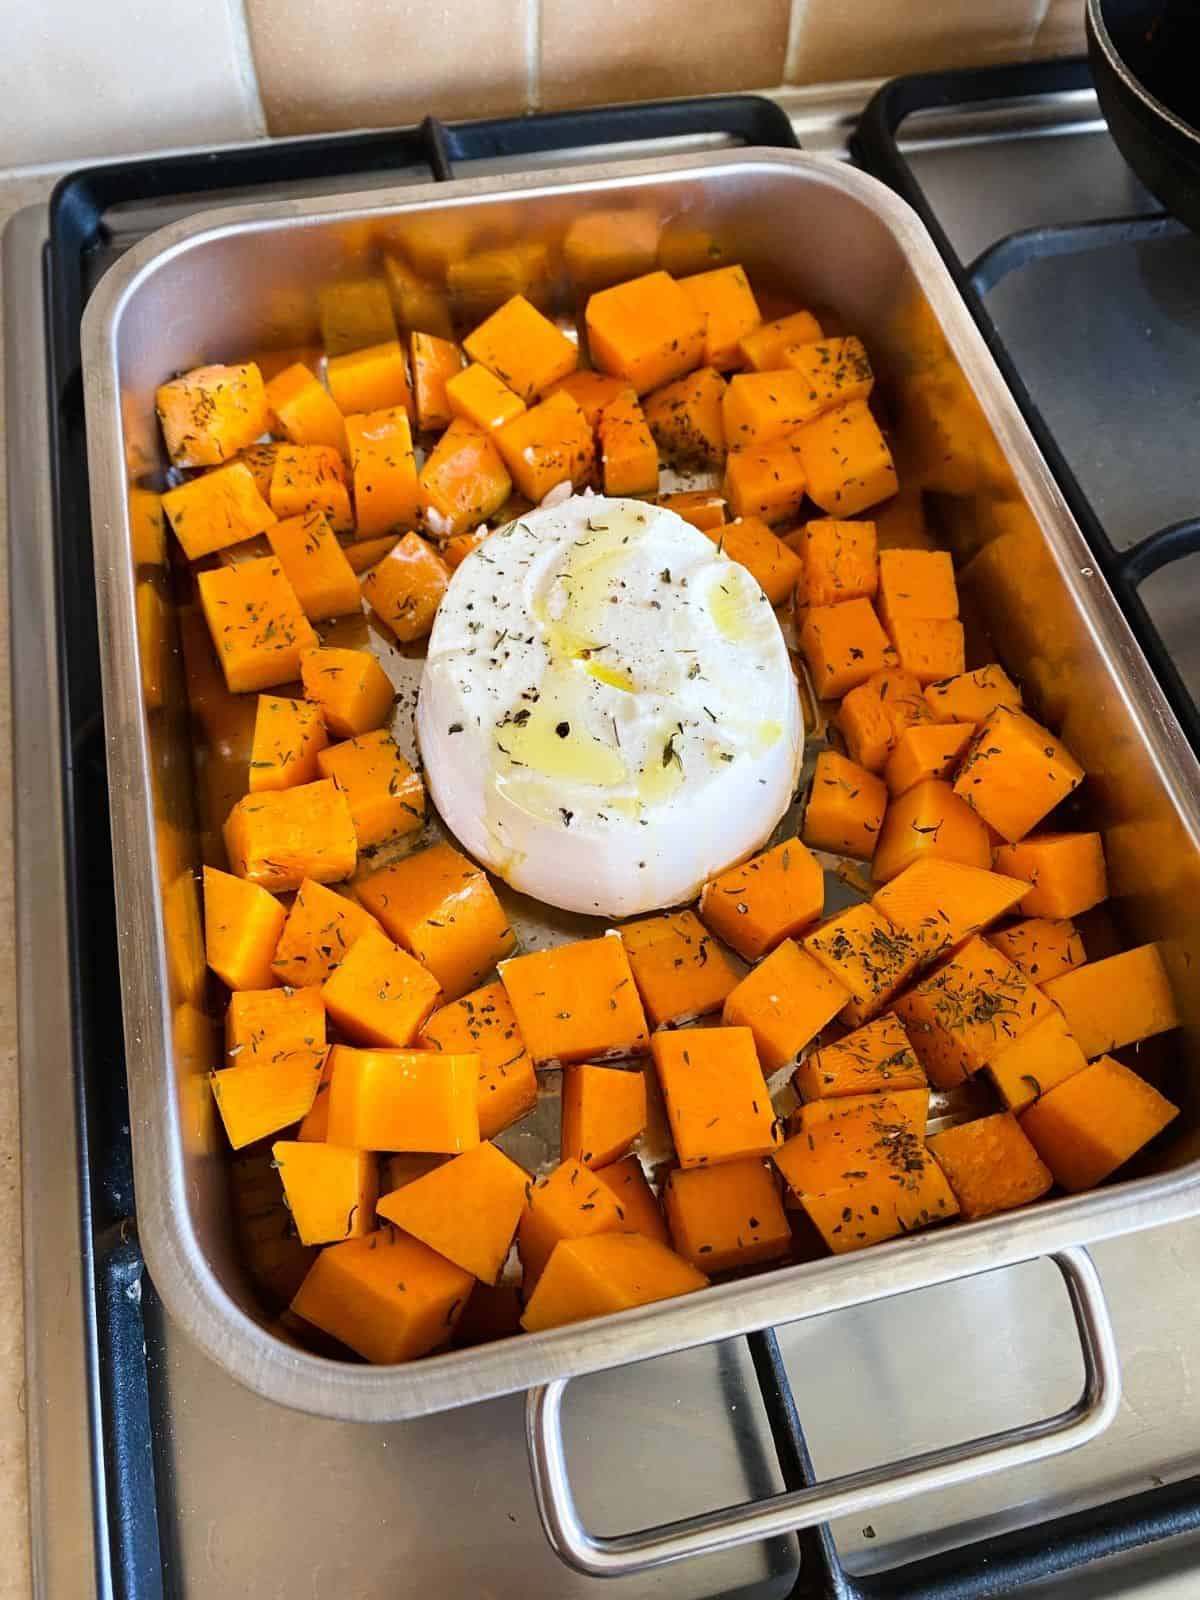 ricotta and butternut squash in a baking tray.